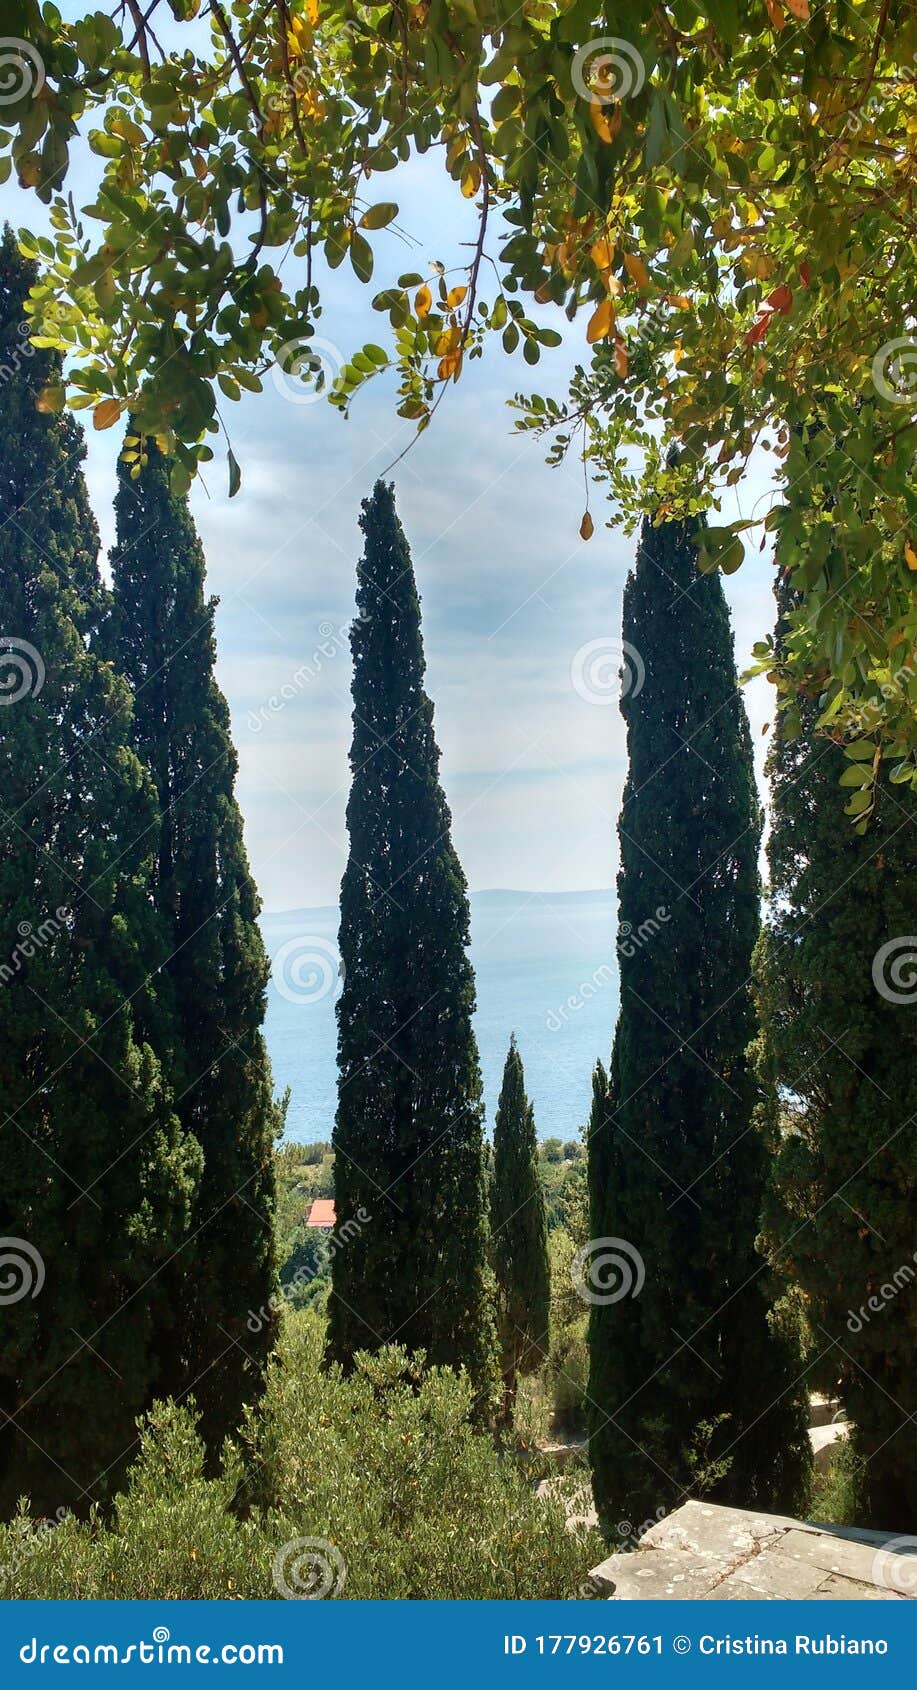 green pine trees in summer